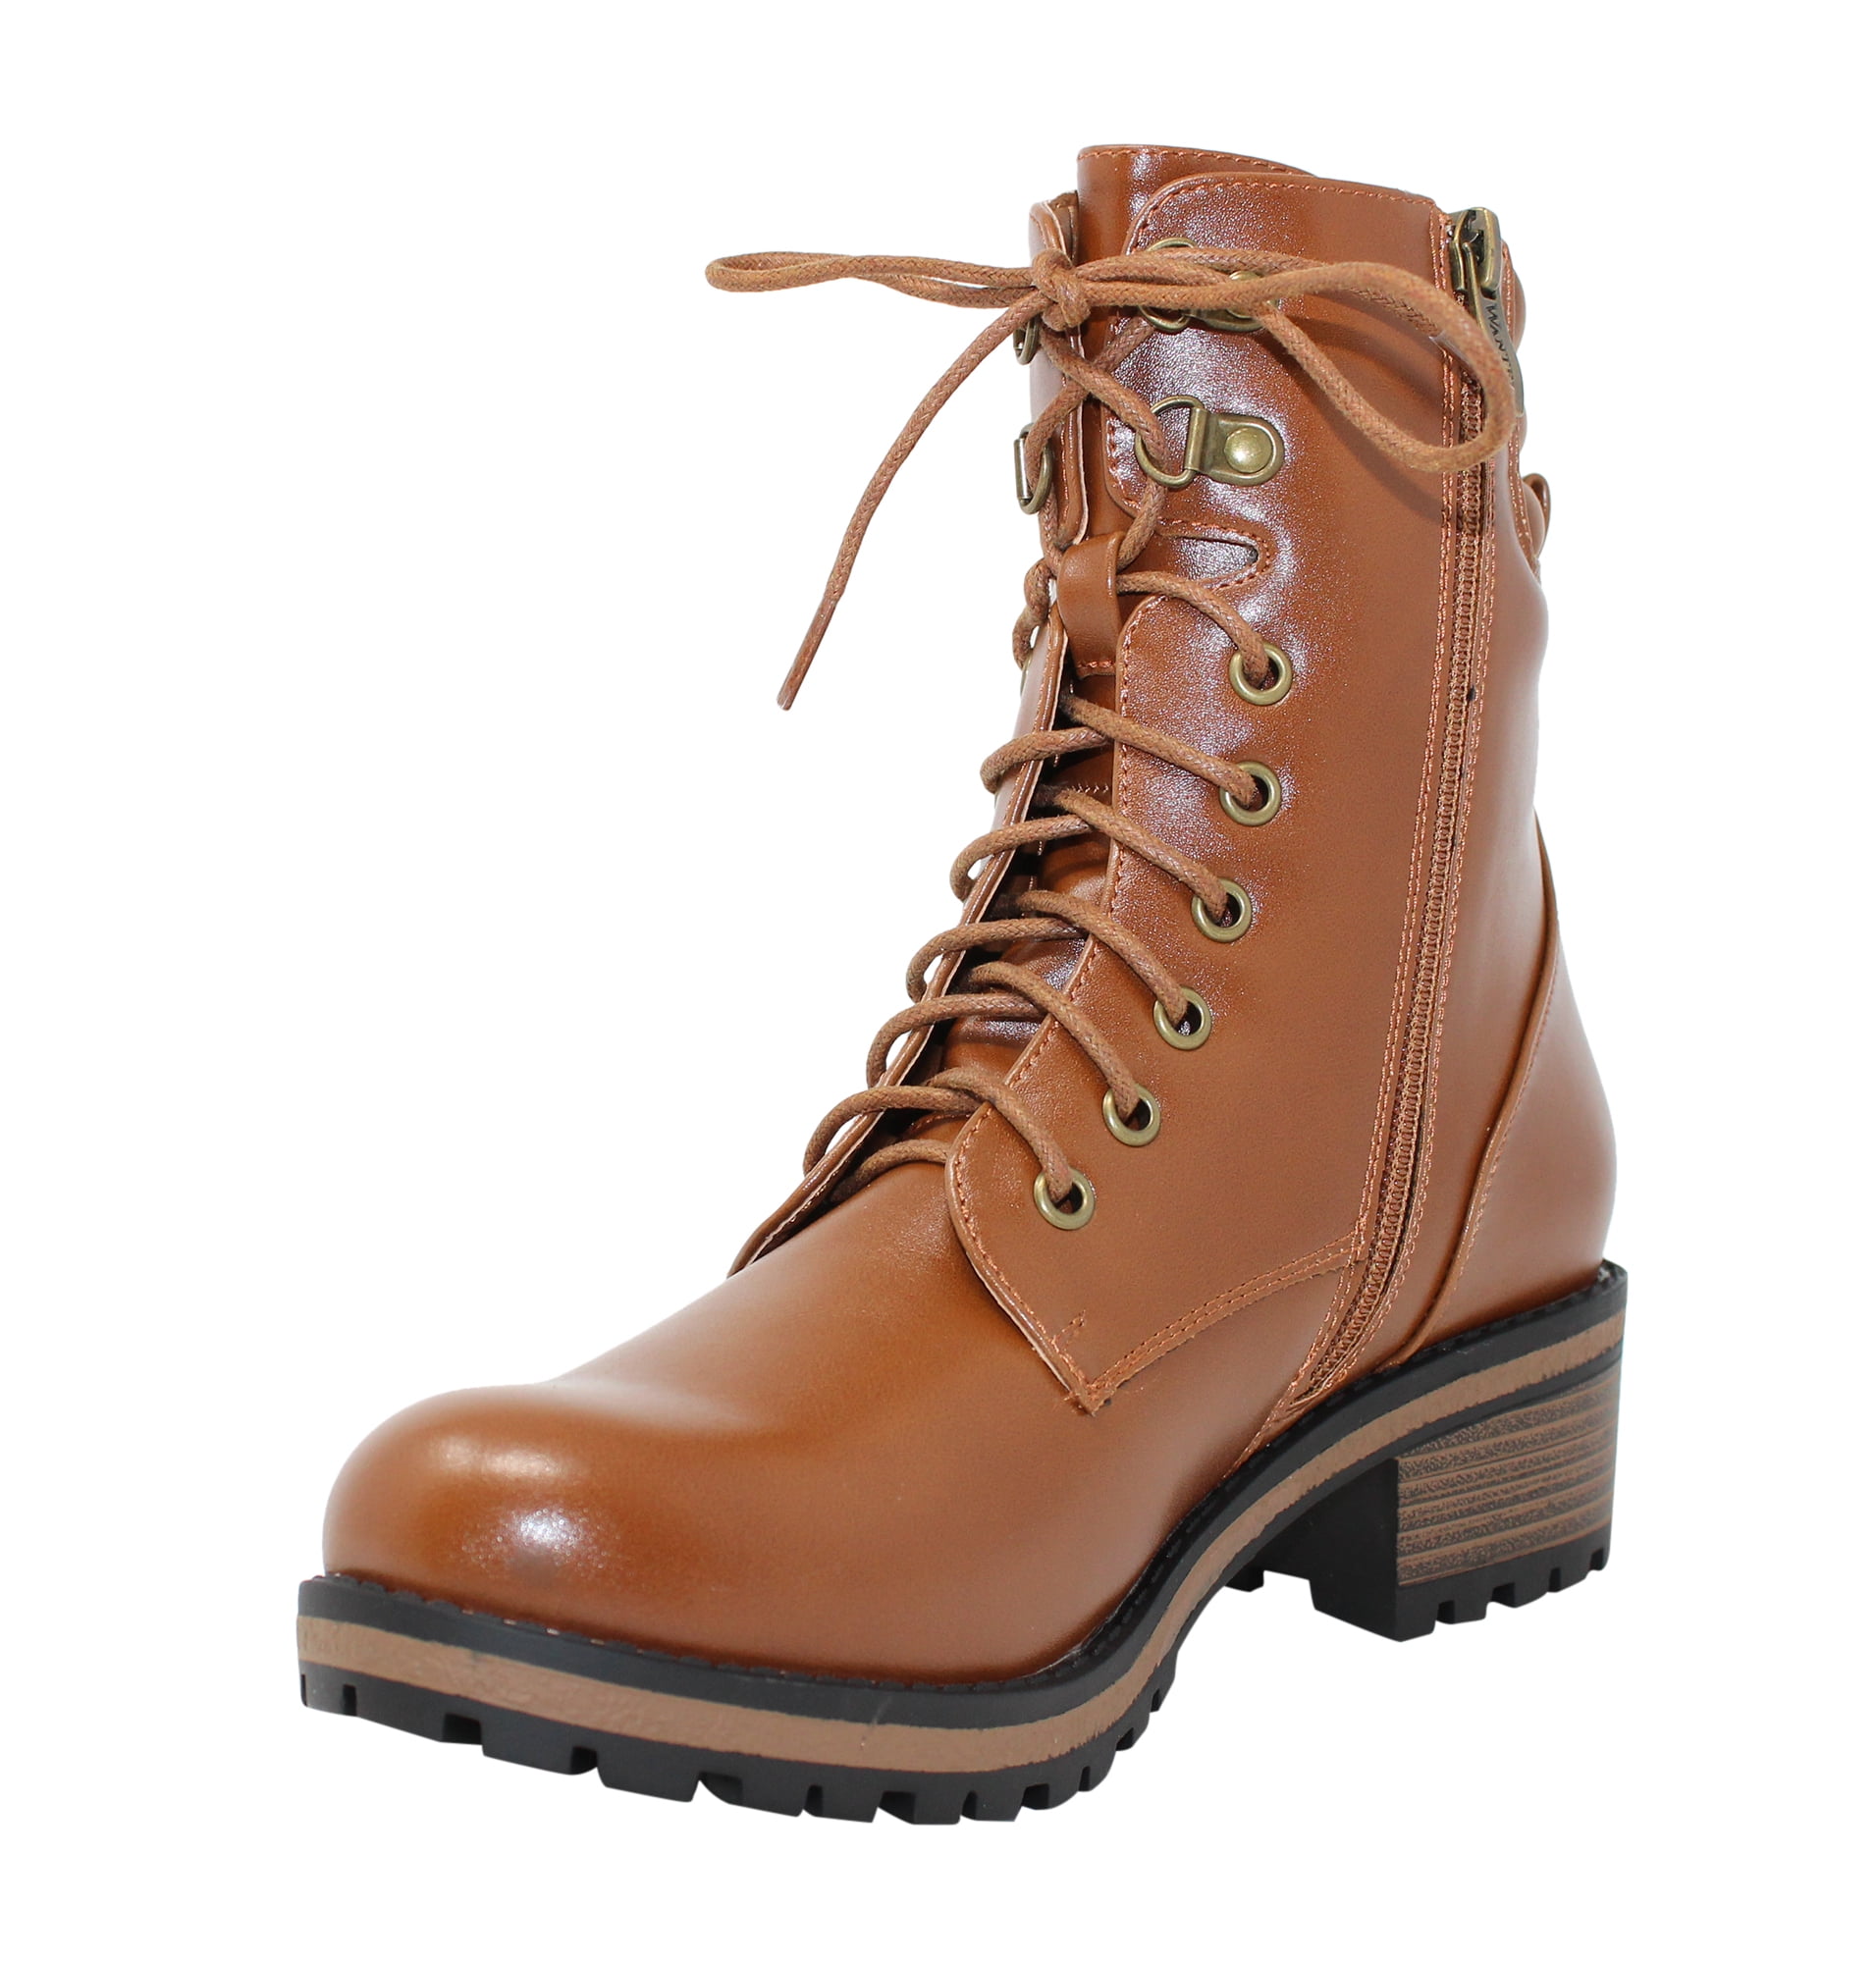 Wanted Shoes - Wanted Women's Oregon Lace-Up Combat Boots - Walmart.com ...